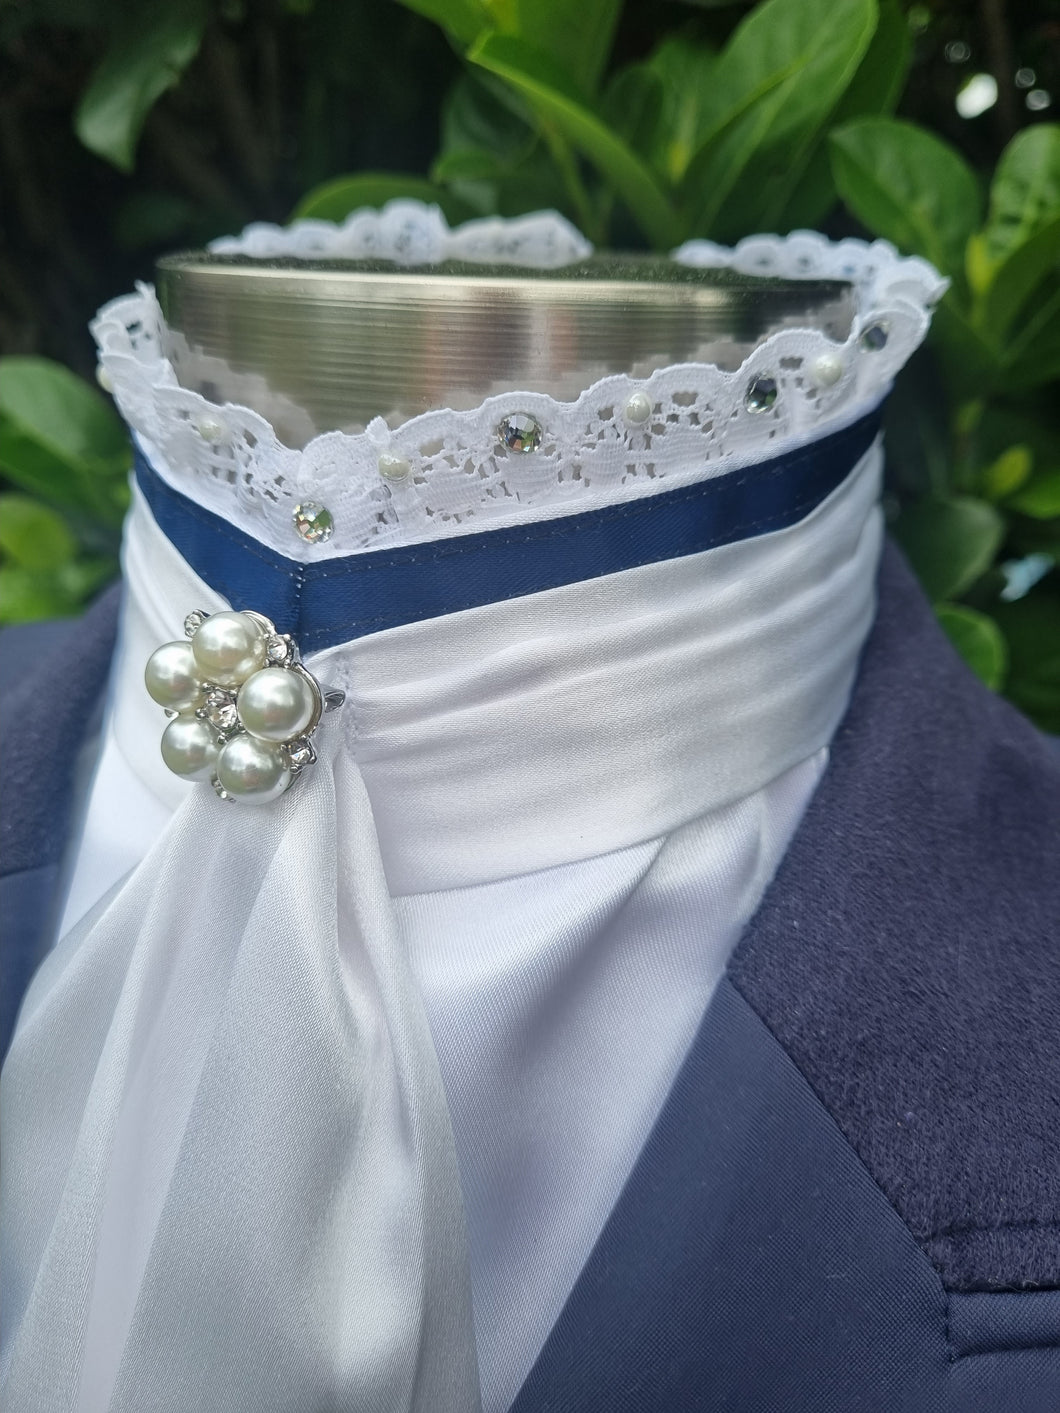 ERA EURO BELLE with PEARLS & CRYSTALS Stock Tie - White lustre satin with Navy blue trim, lace frill, pearl & crystal trim and brooch